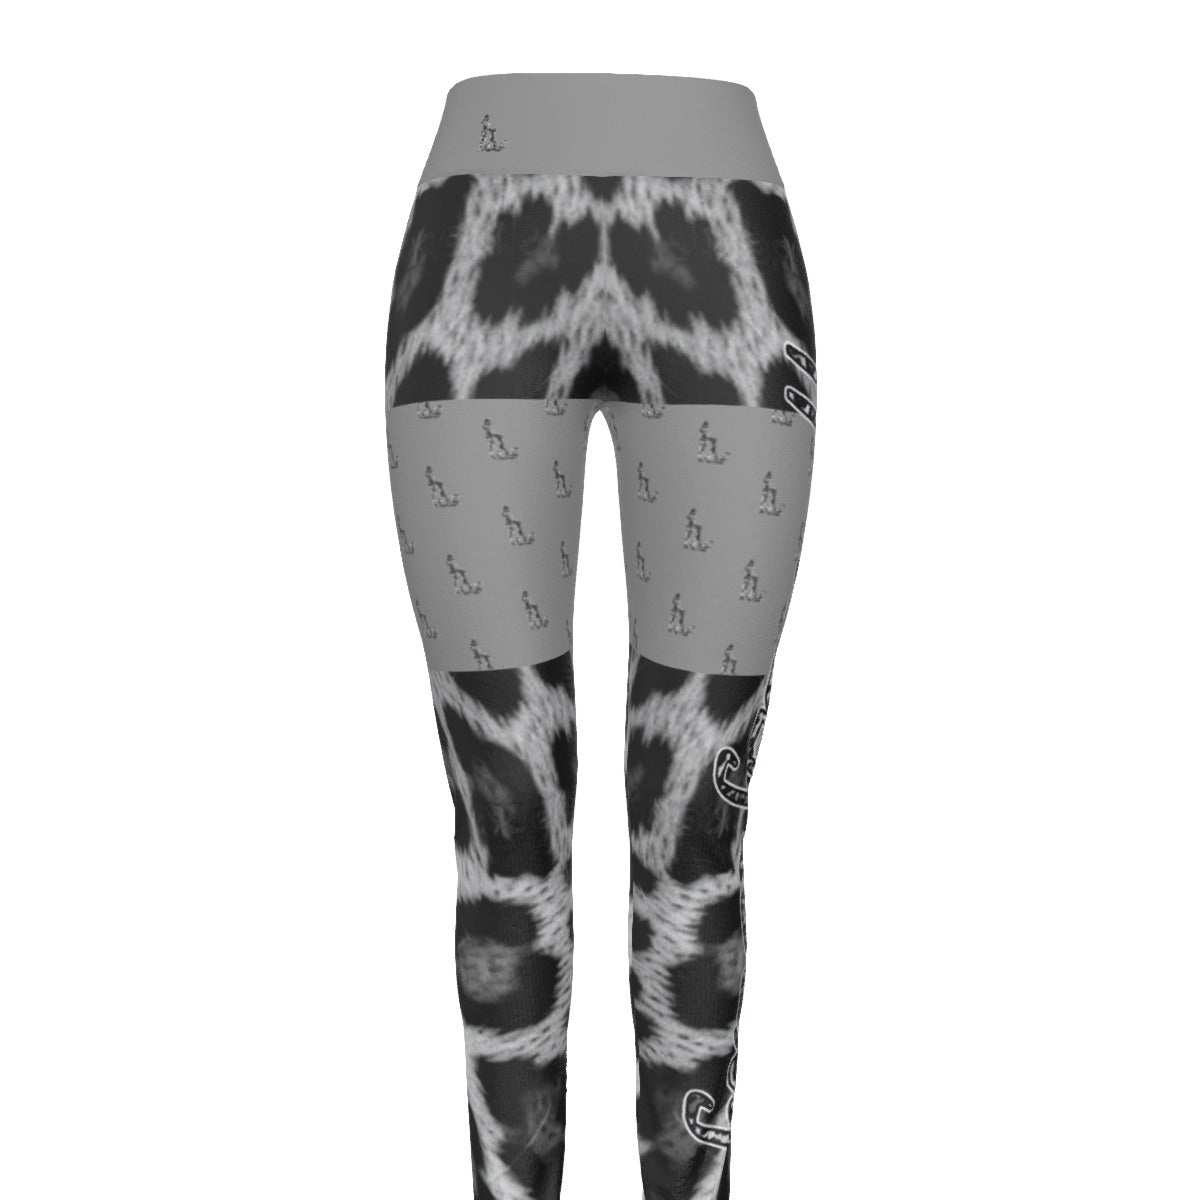 Officially Sexy Snow Leopard Print Collection Women's Grey High Waist Thigh High Booty Popper Leggings #2 No OS (English) 1